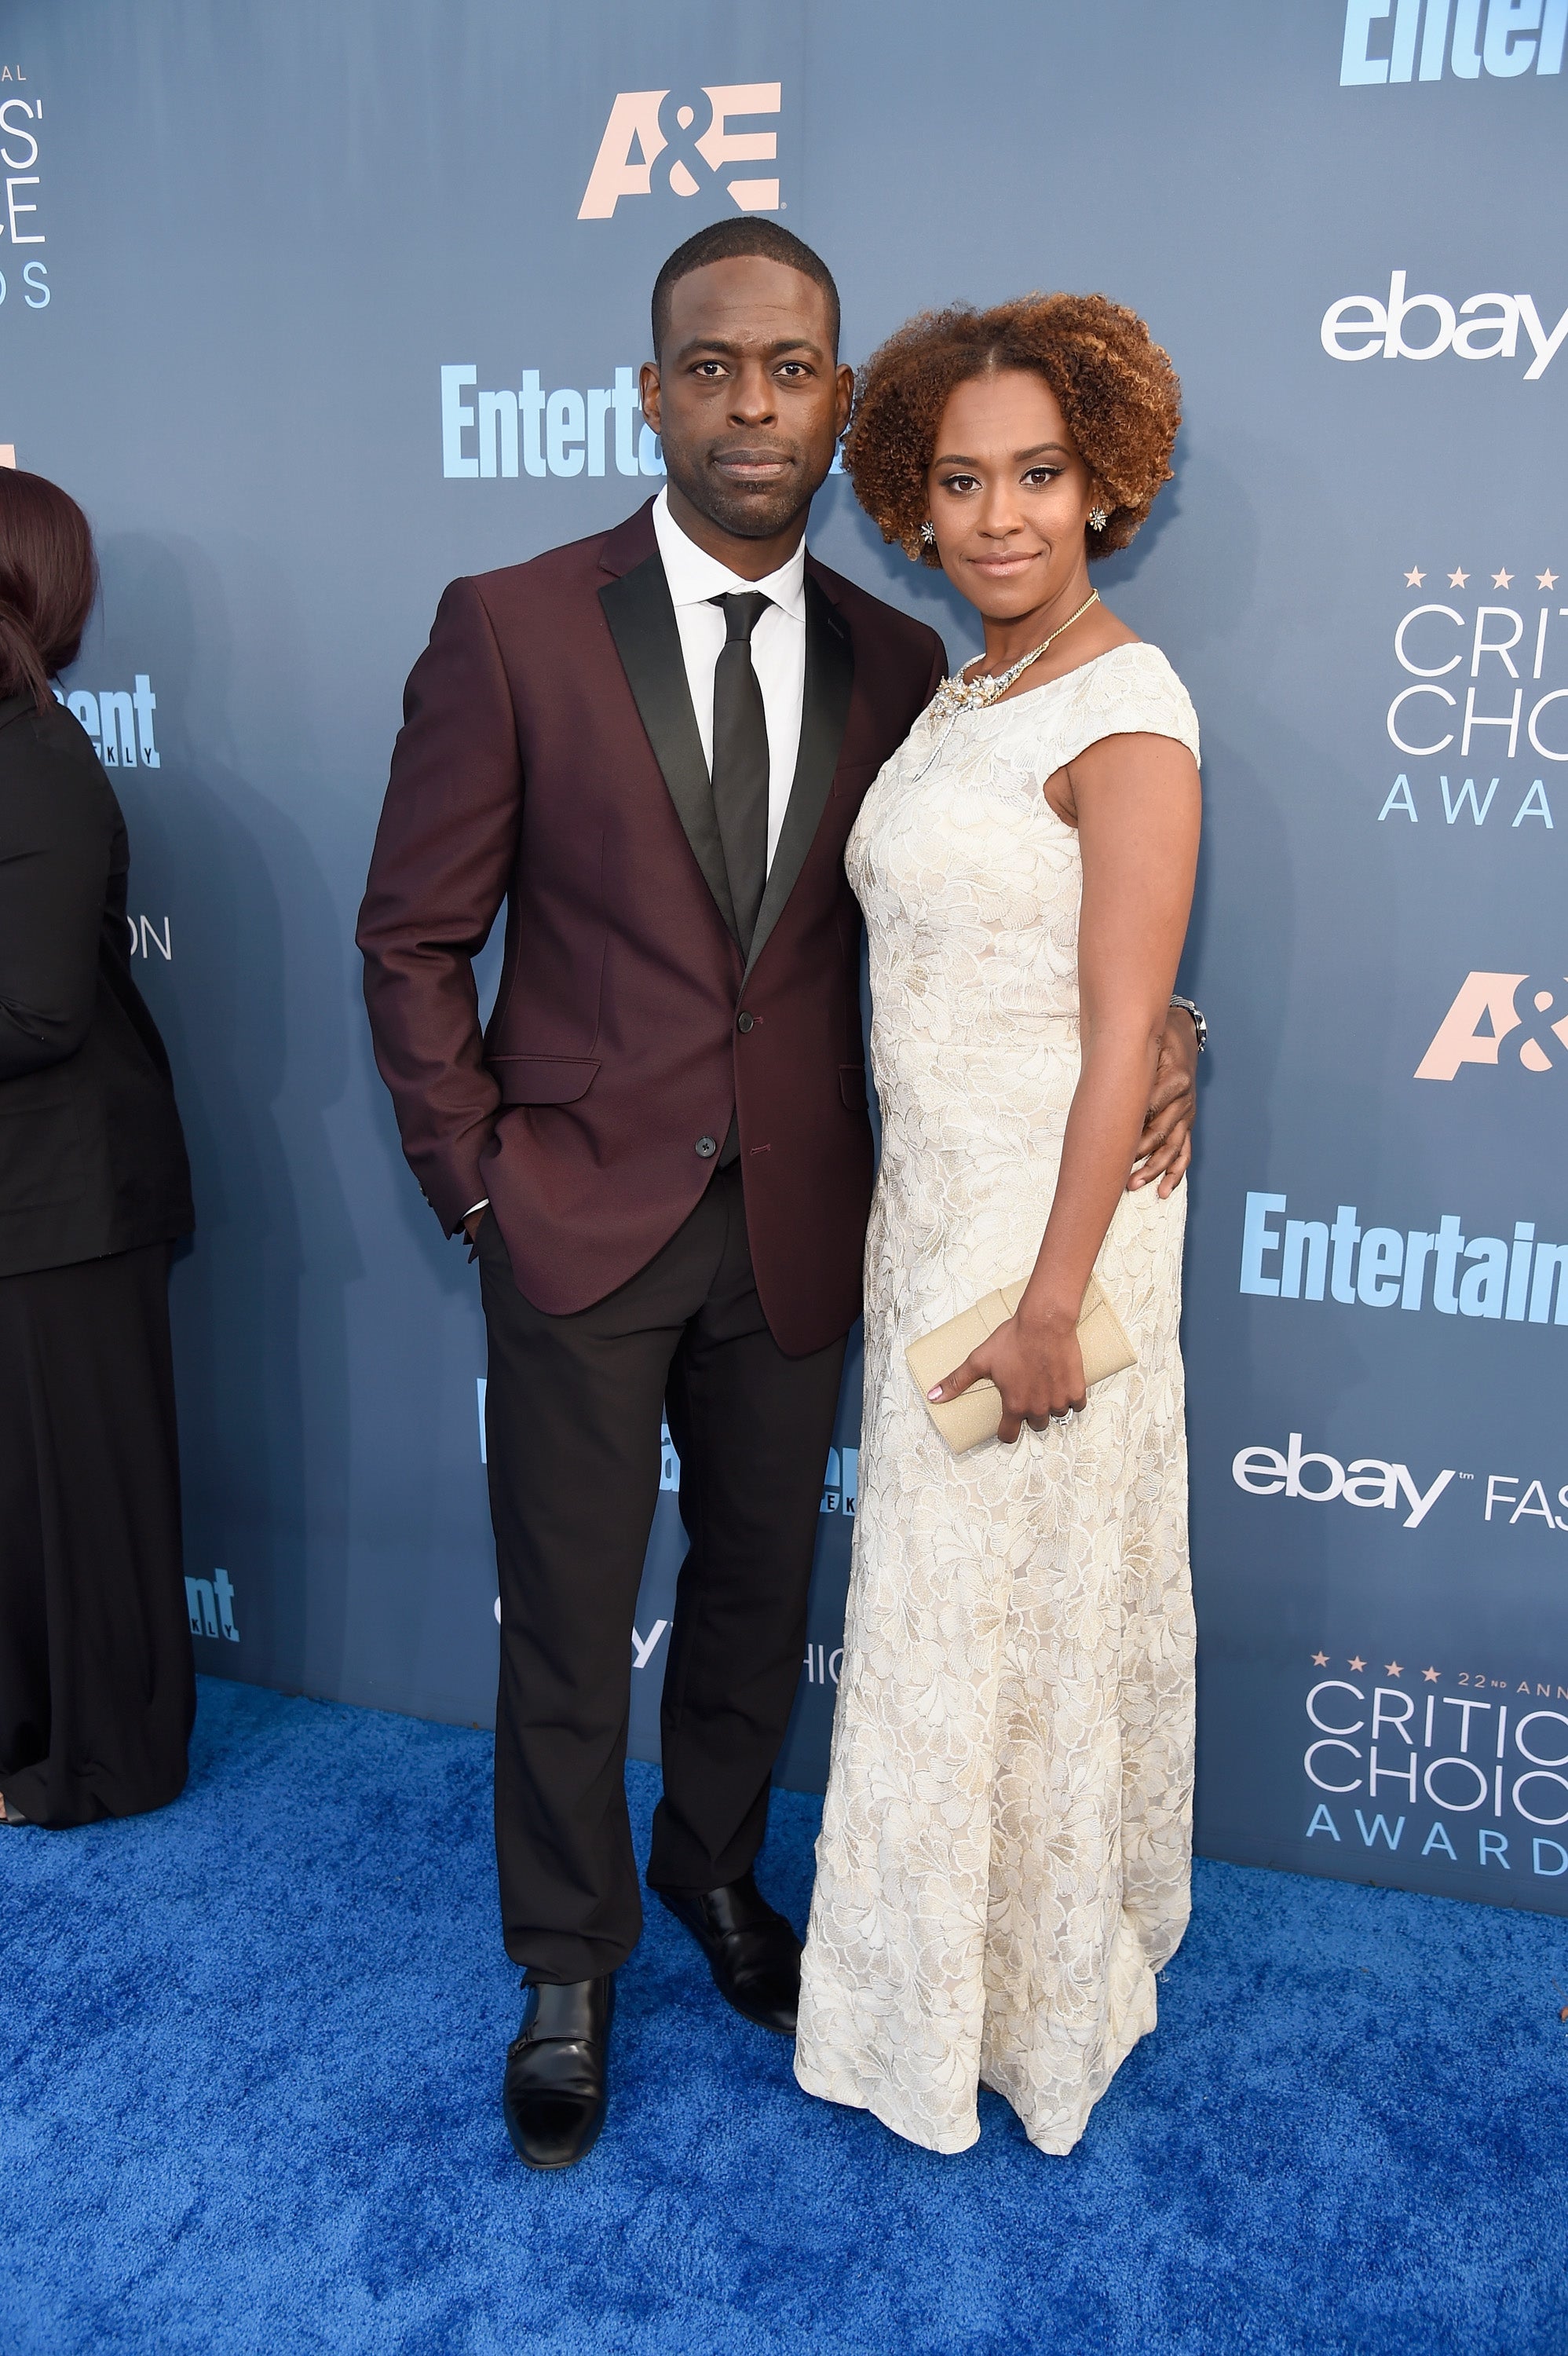 The Show-Stopping Looks From The 2016 Critics' Choice Awards
